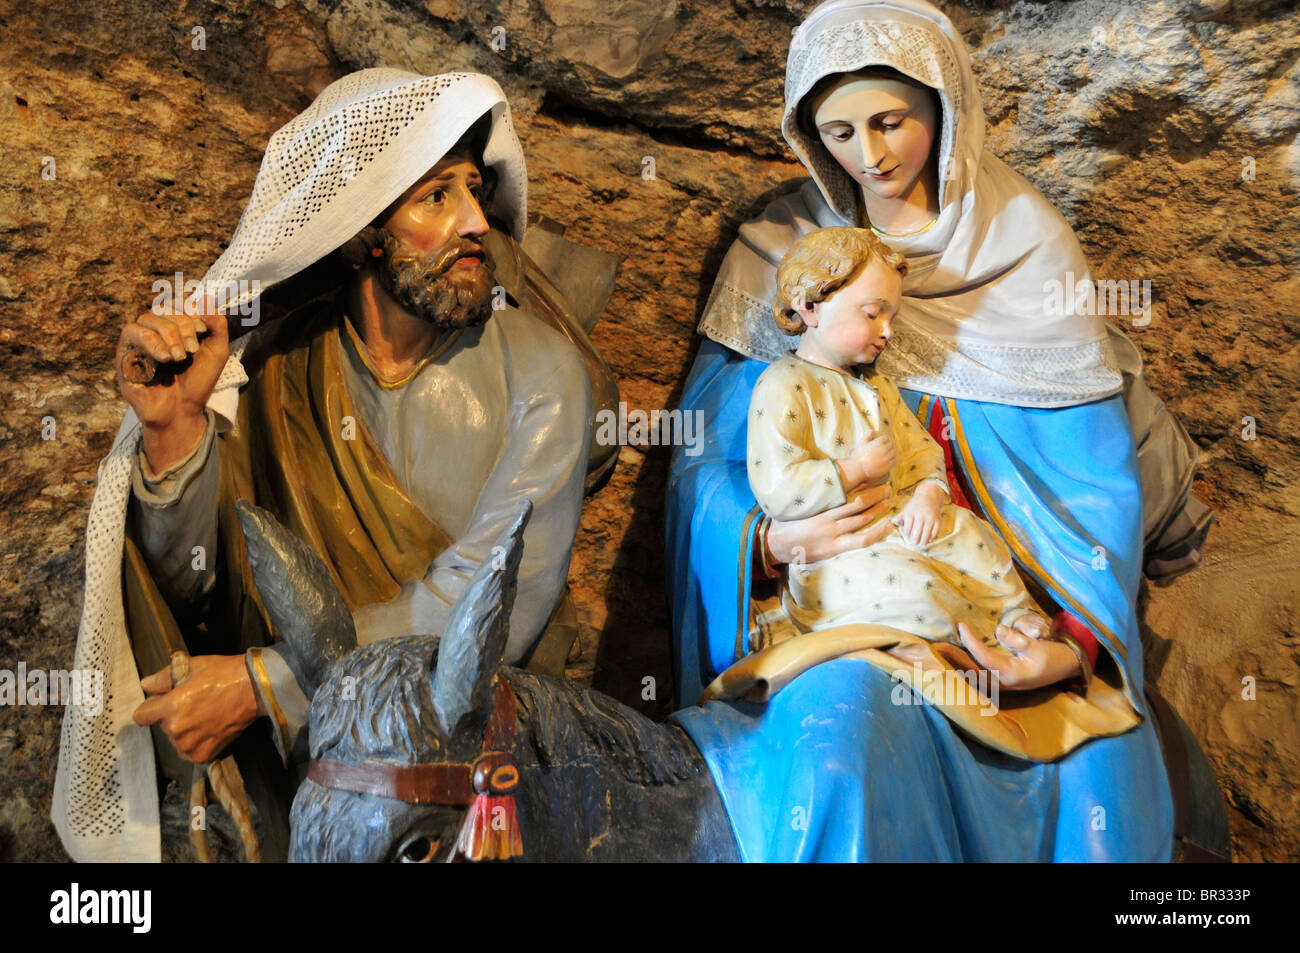 Depiction of Mary, Joseph and young Jesus in the Milk Grotto, Bethlehem, West Bank, Israel, Middle East, the Orient Stock Photo